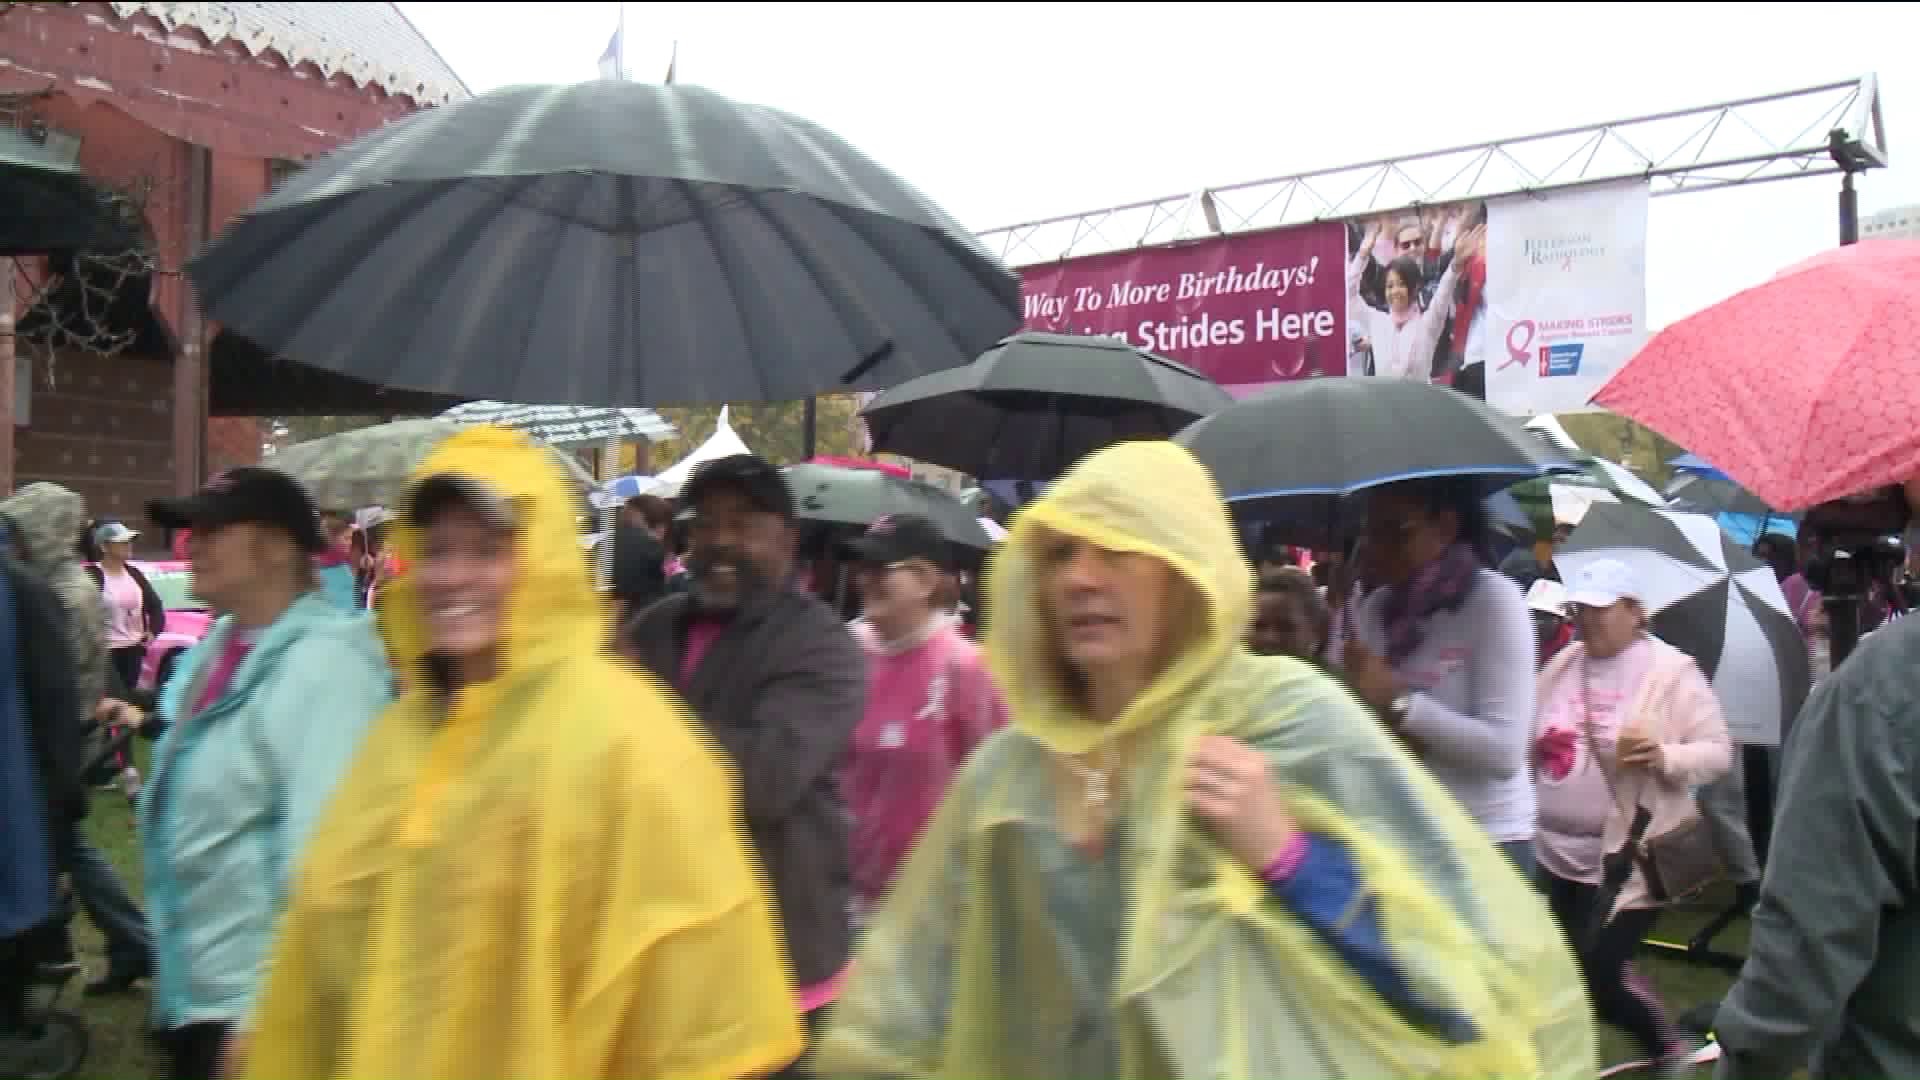 Walking in the rain to fight against breast cancer